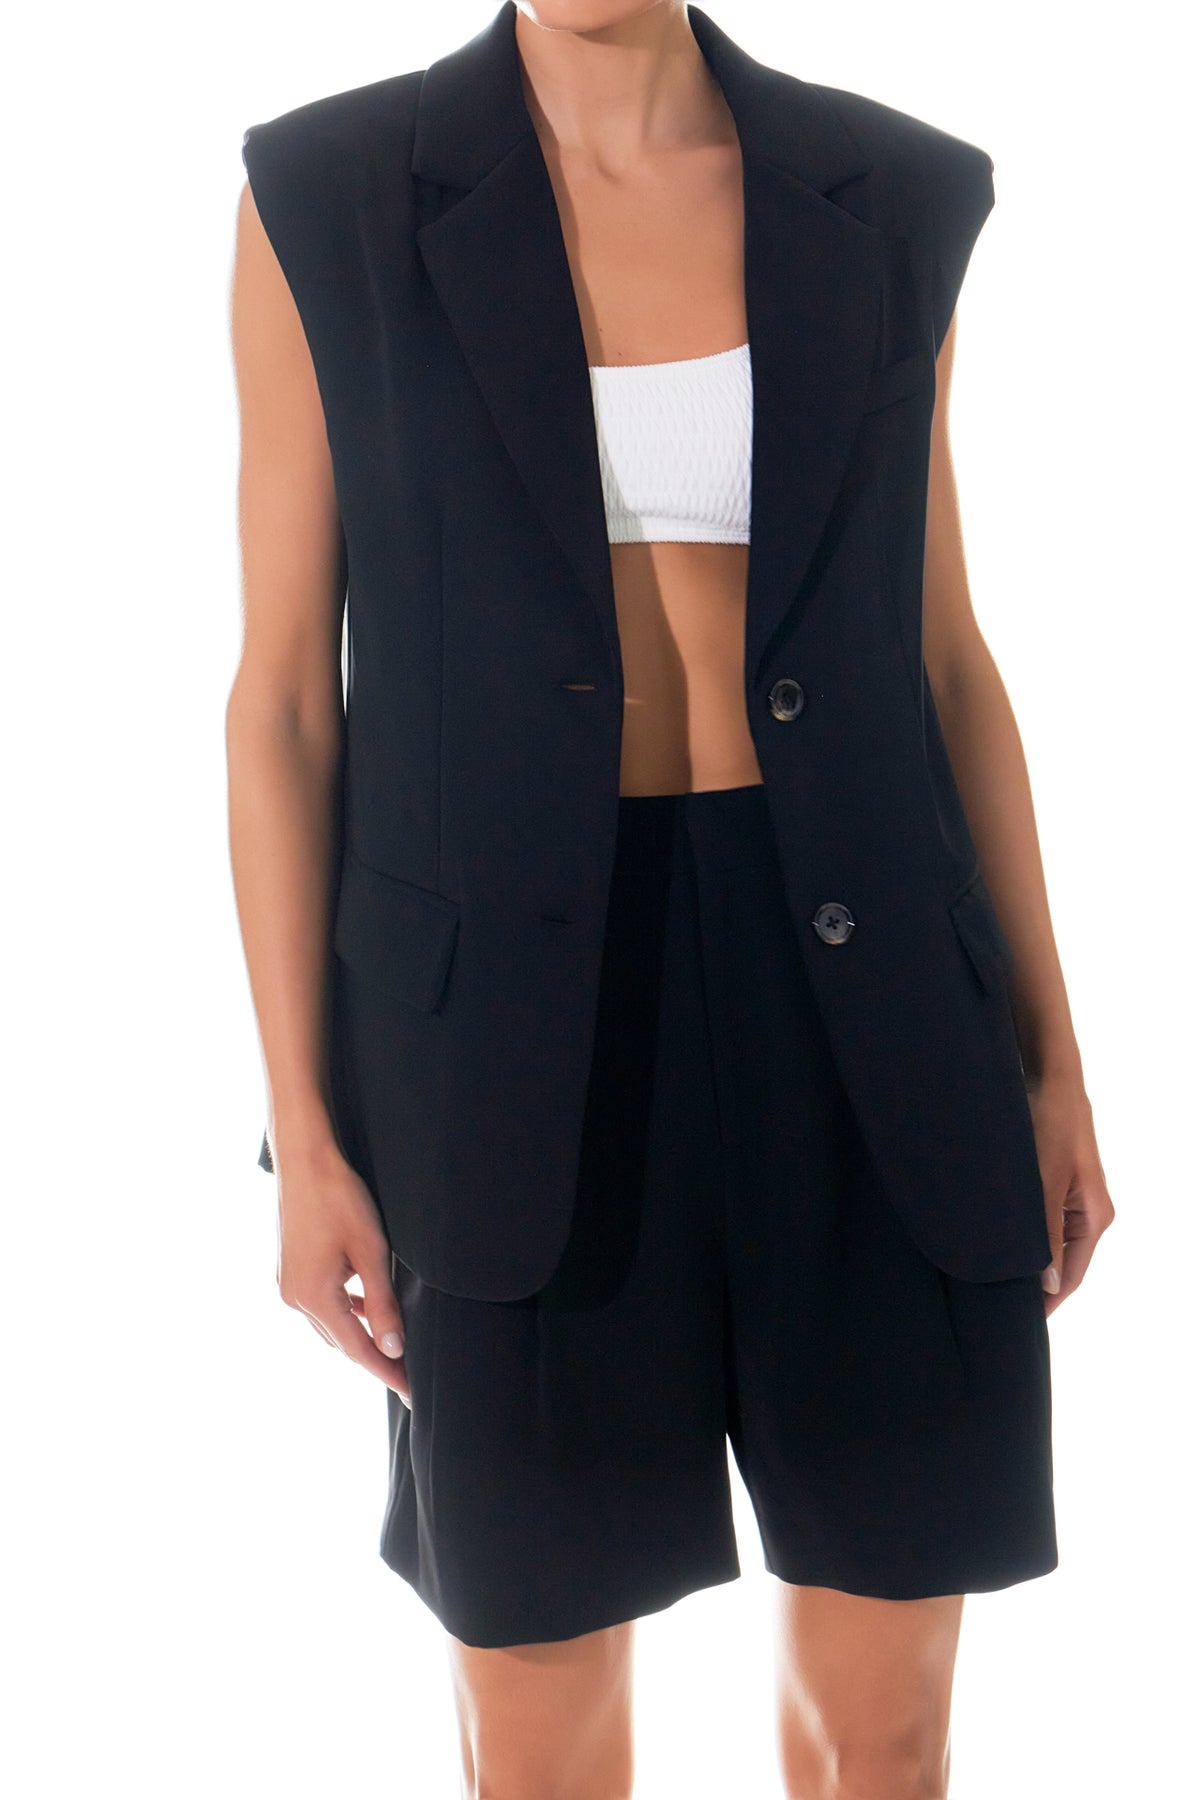 GREY LAB - Oversized Blazer Vest - OUTERWEAR available at Objectrare